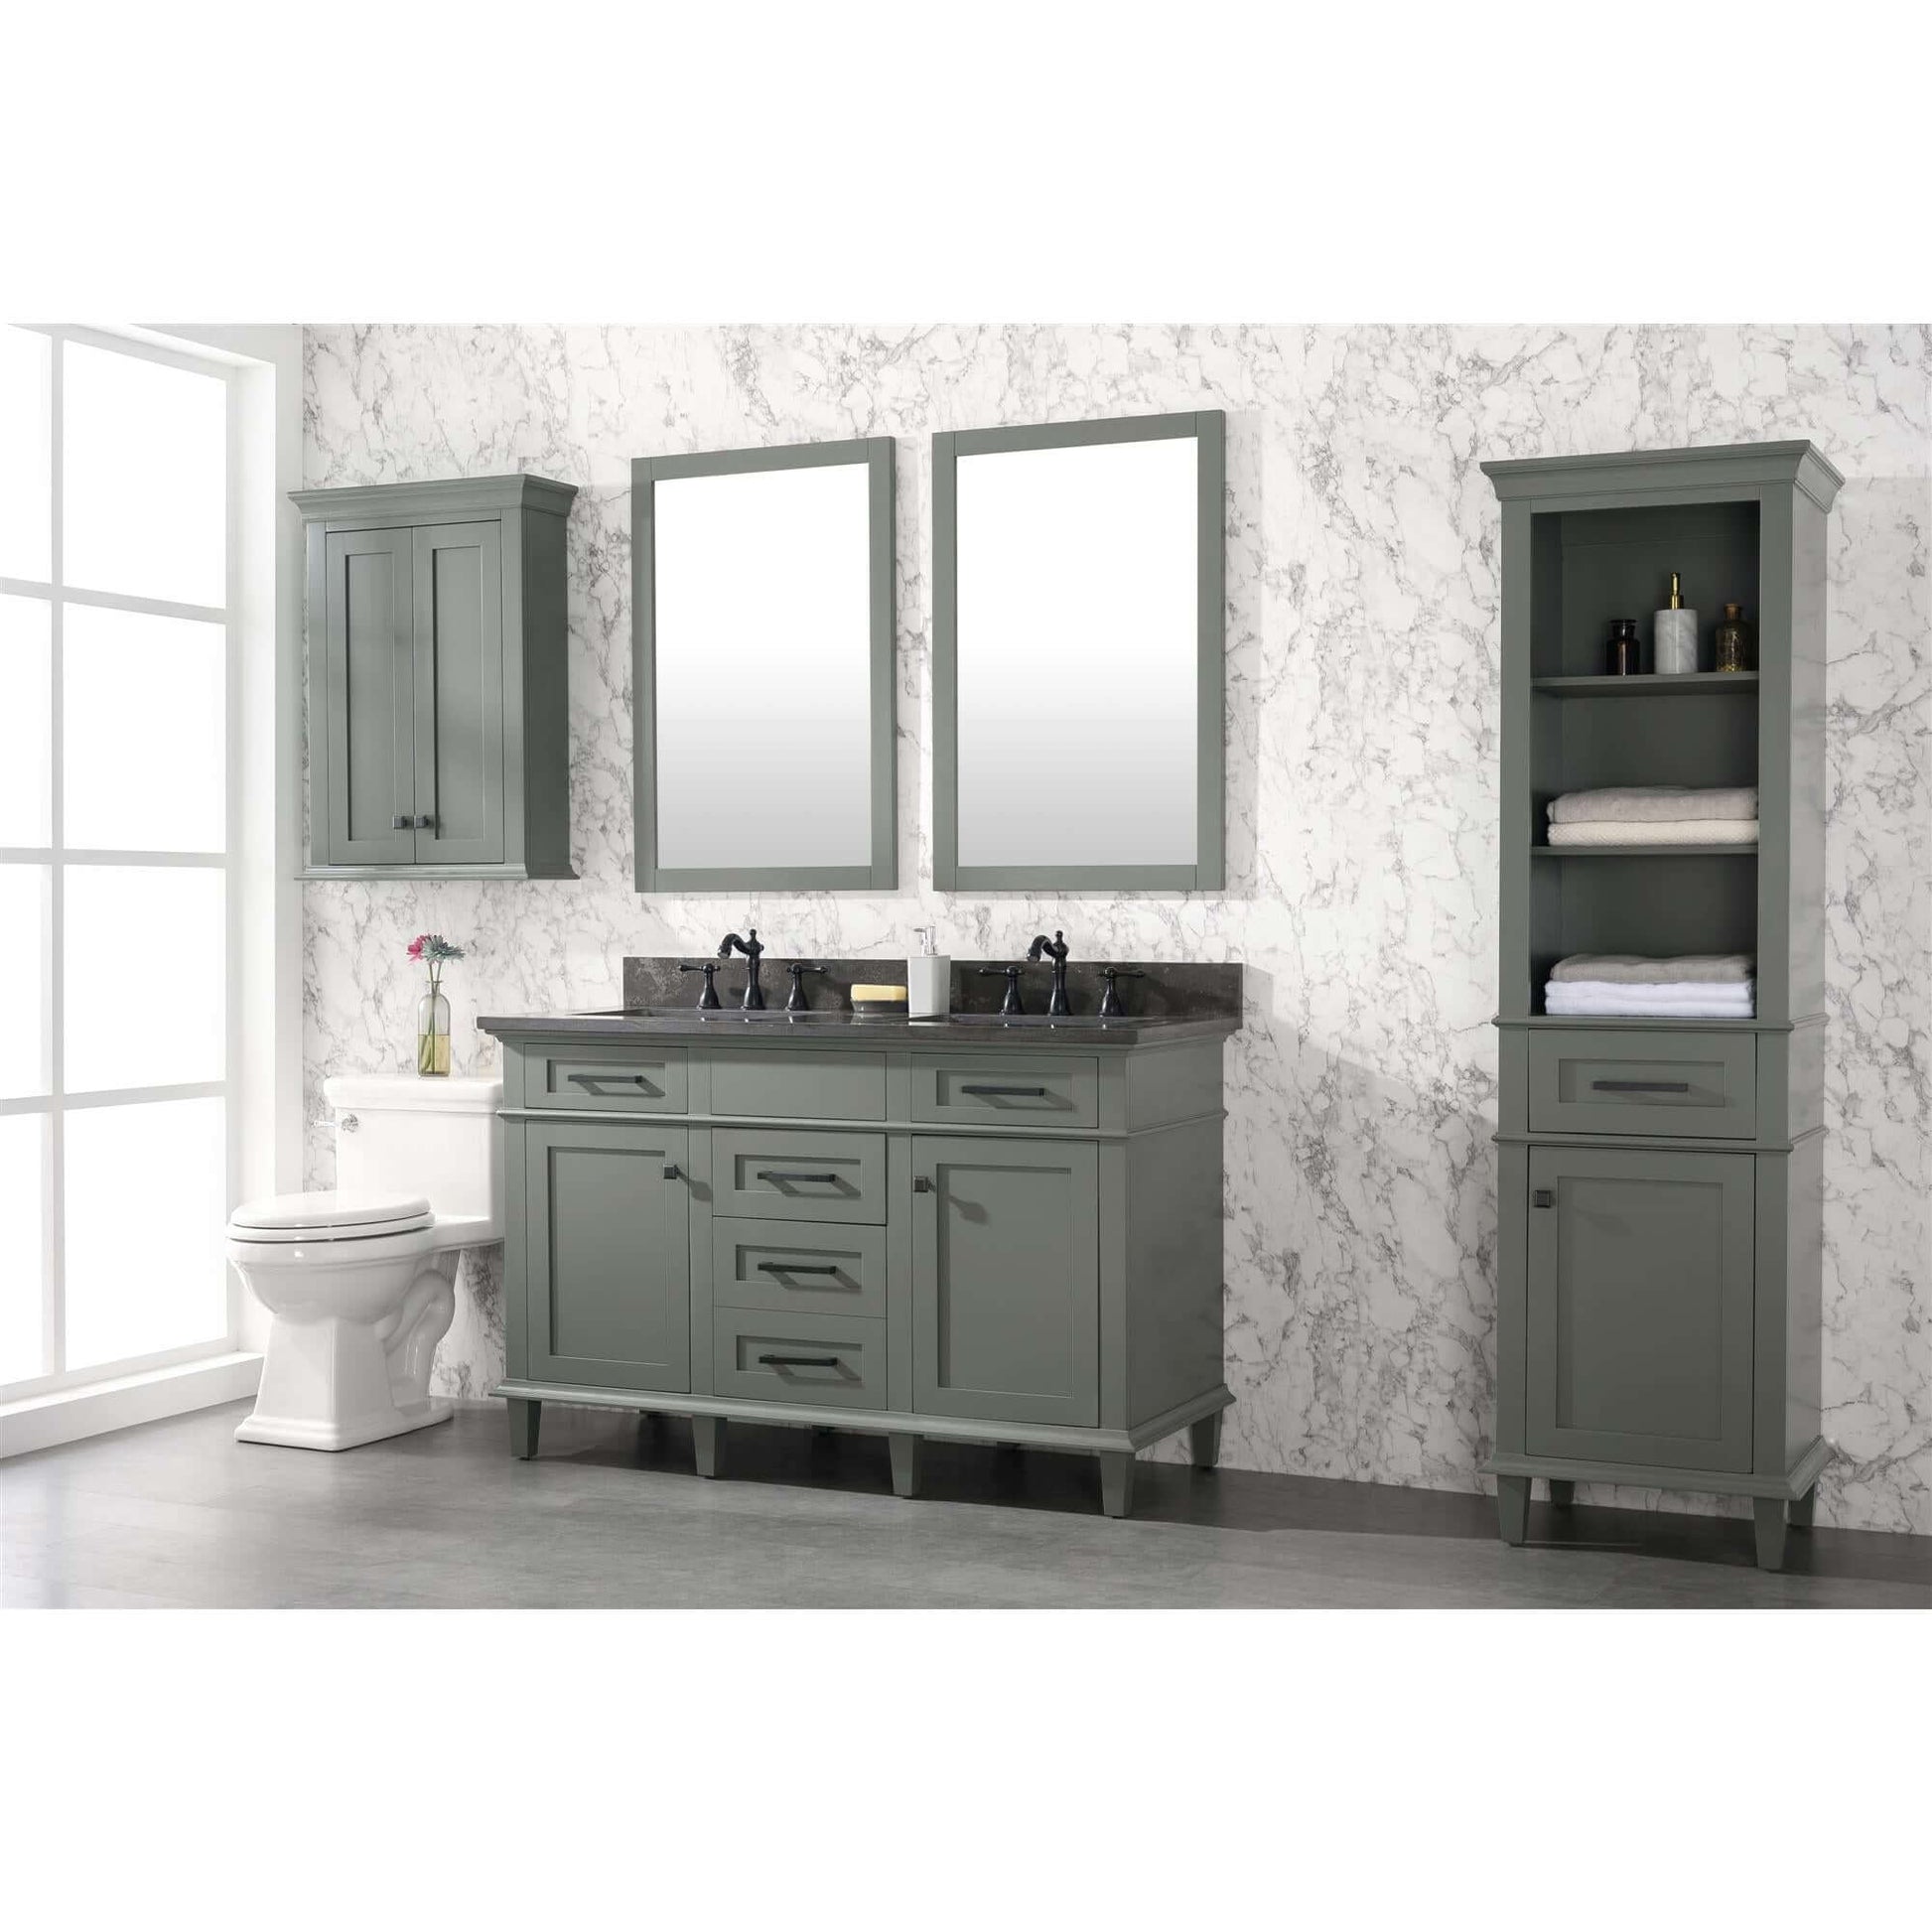 54" Pewter Green Finish Double Sink Vanity Cabinet With Blue Lime Stone Top - WLF2254-PG